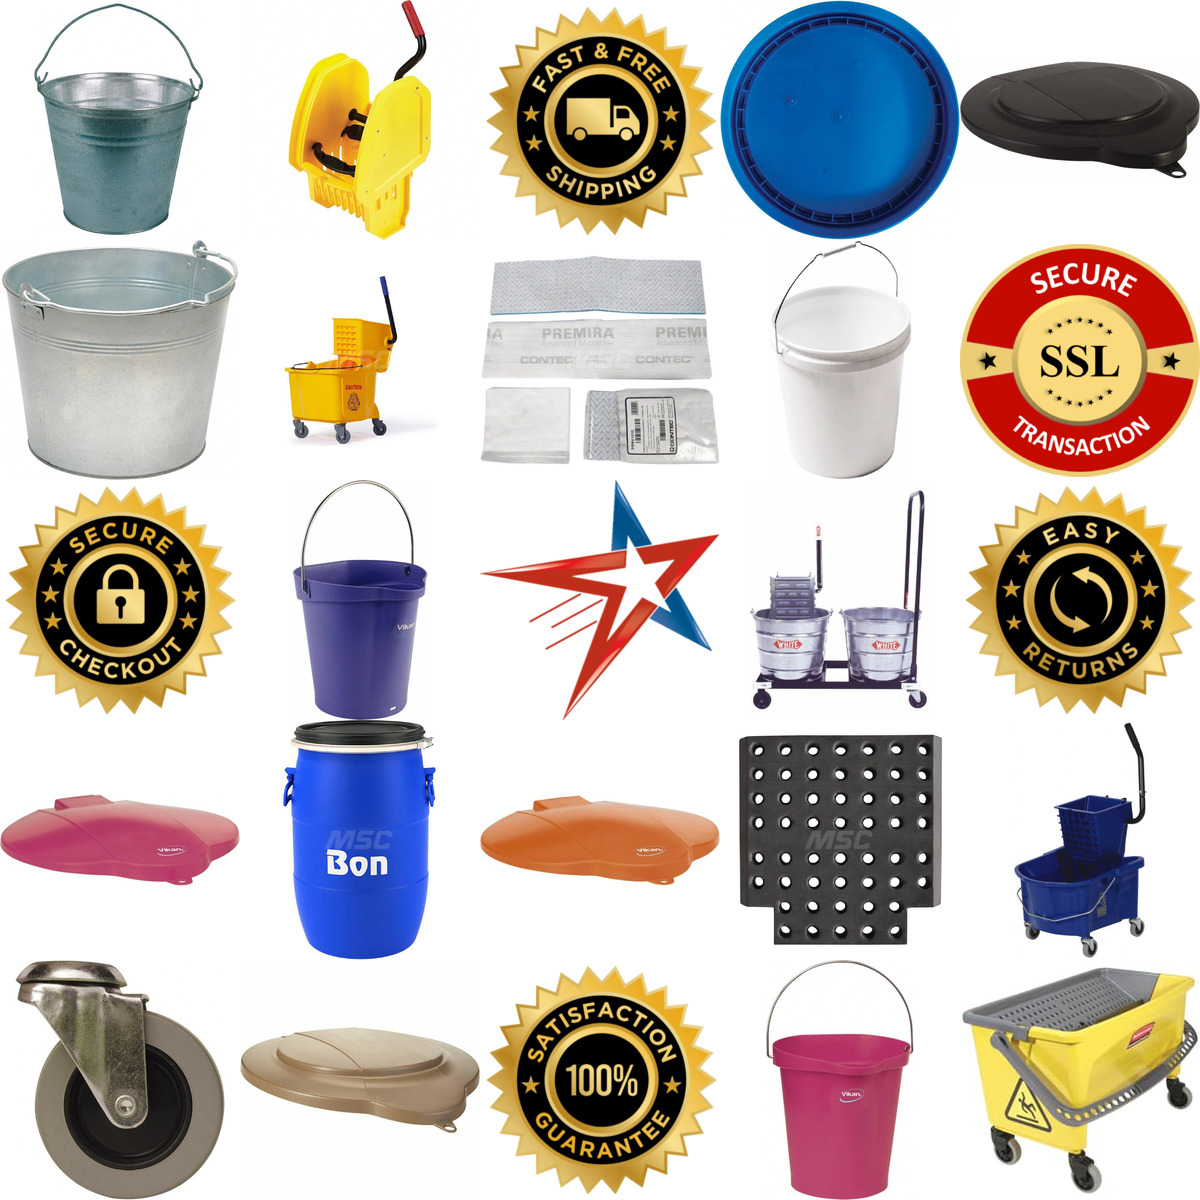 A selection of Buckets Pails and Wringers products on GoVets